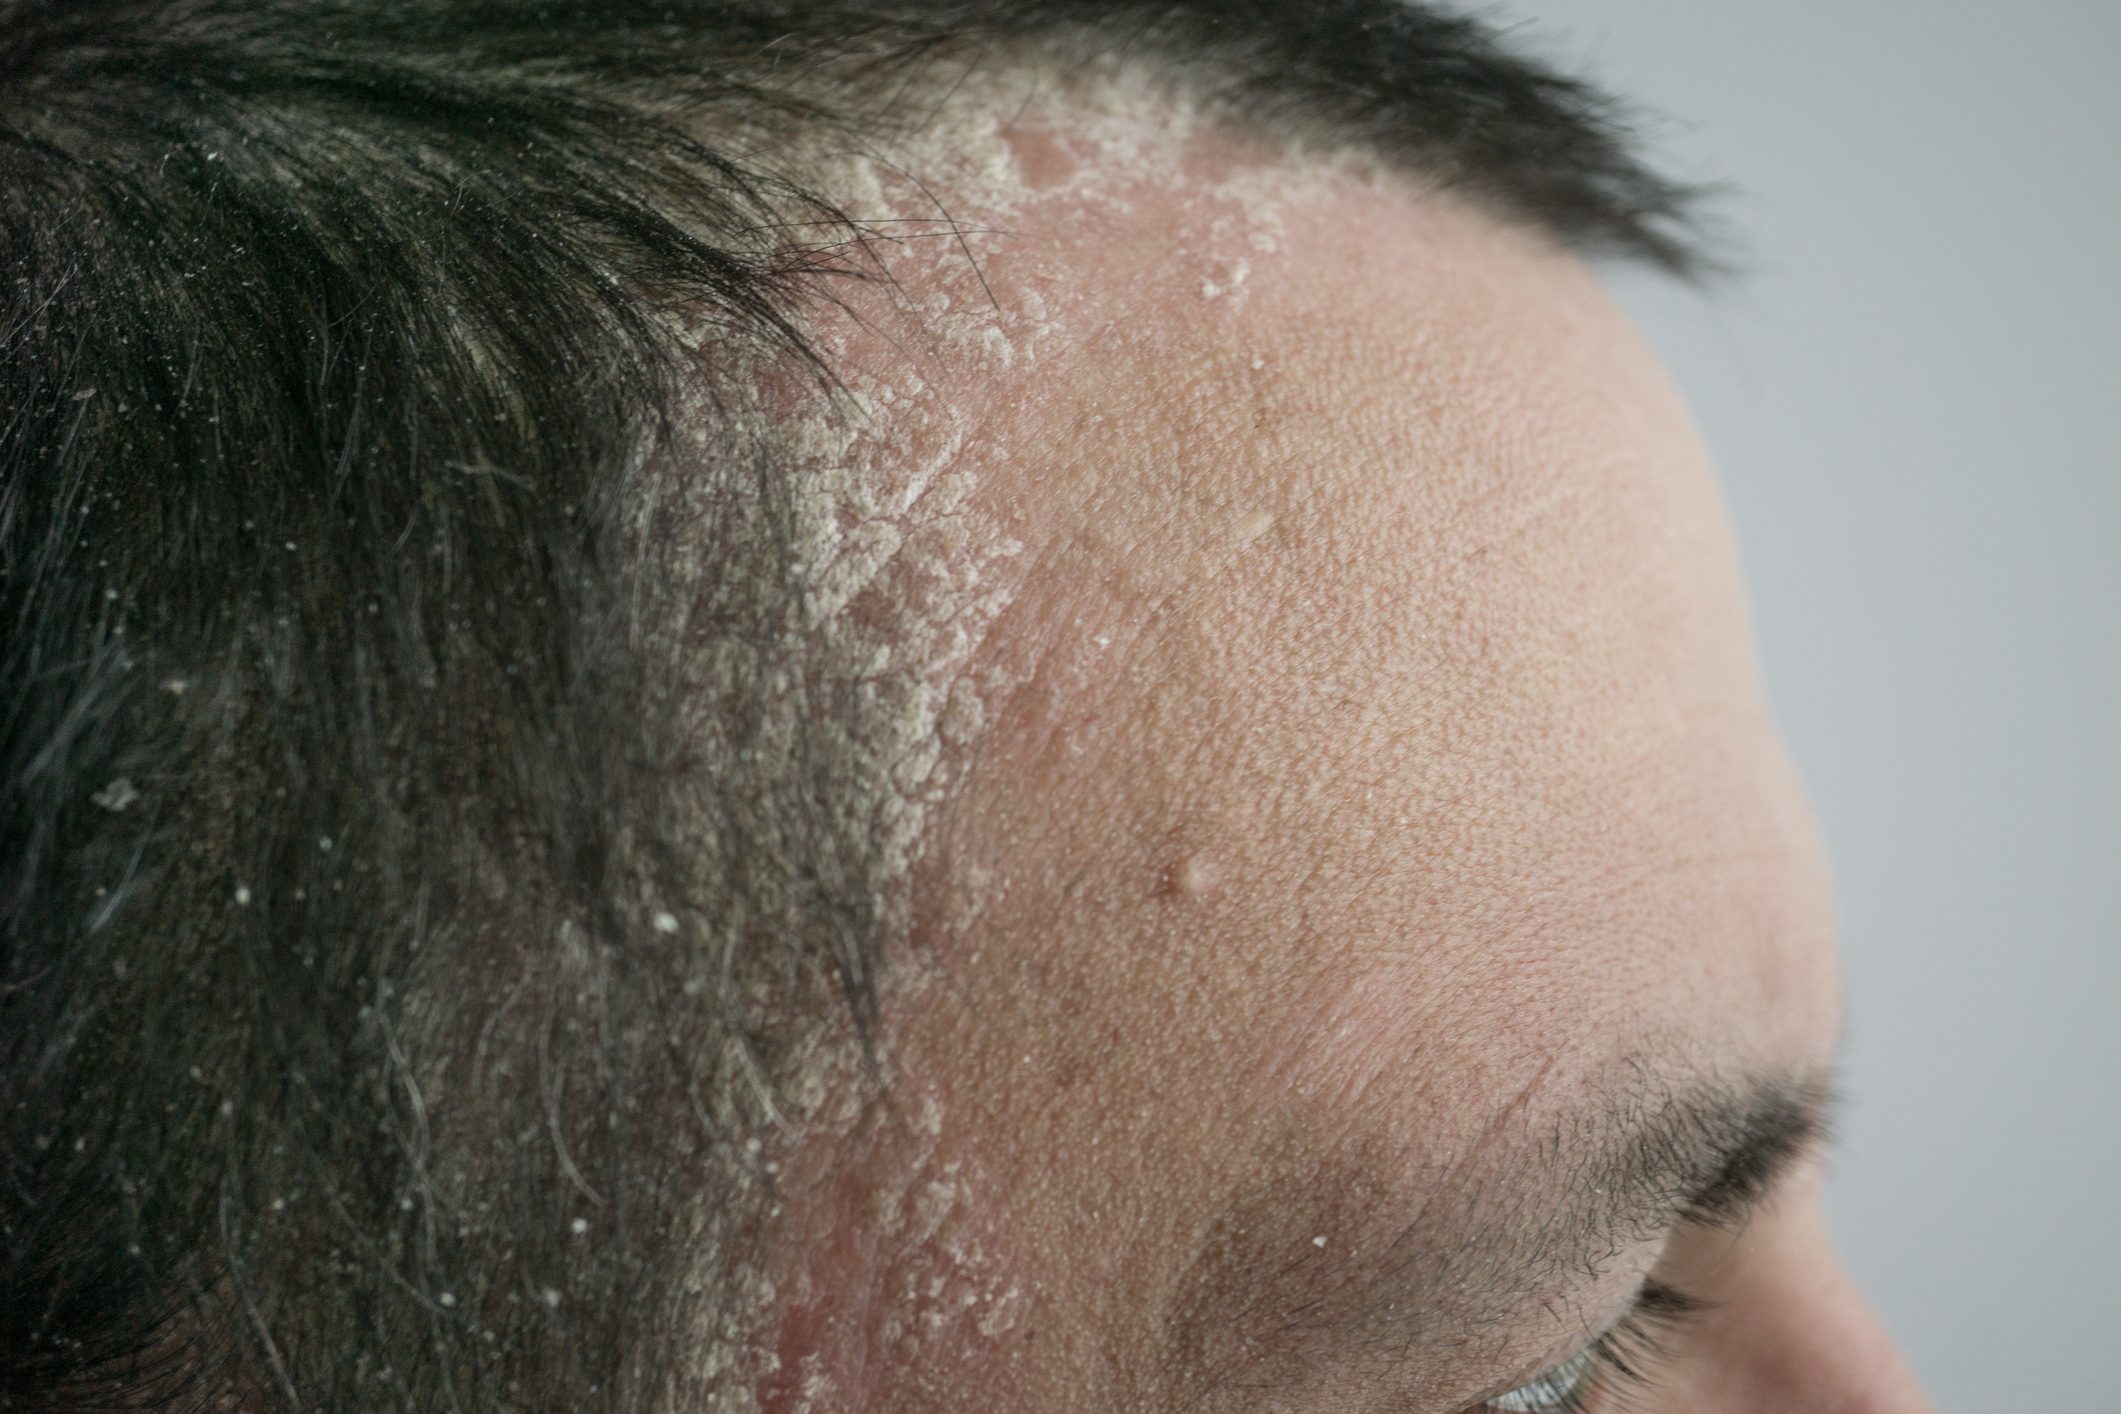 Scalp Psoriasis: What Dermatologists Wish You Knew